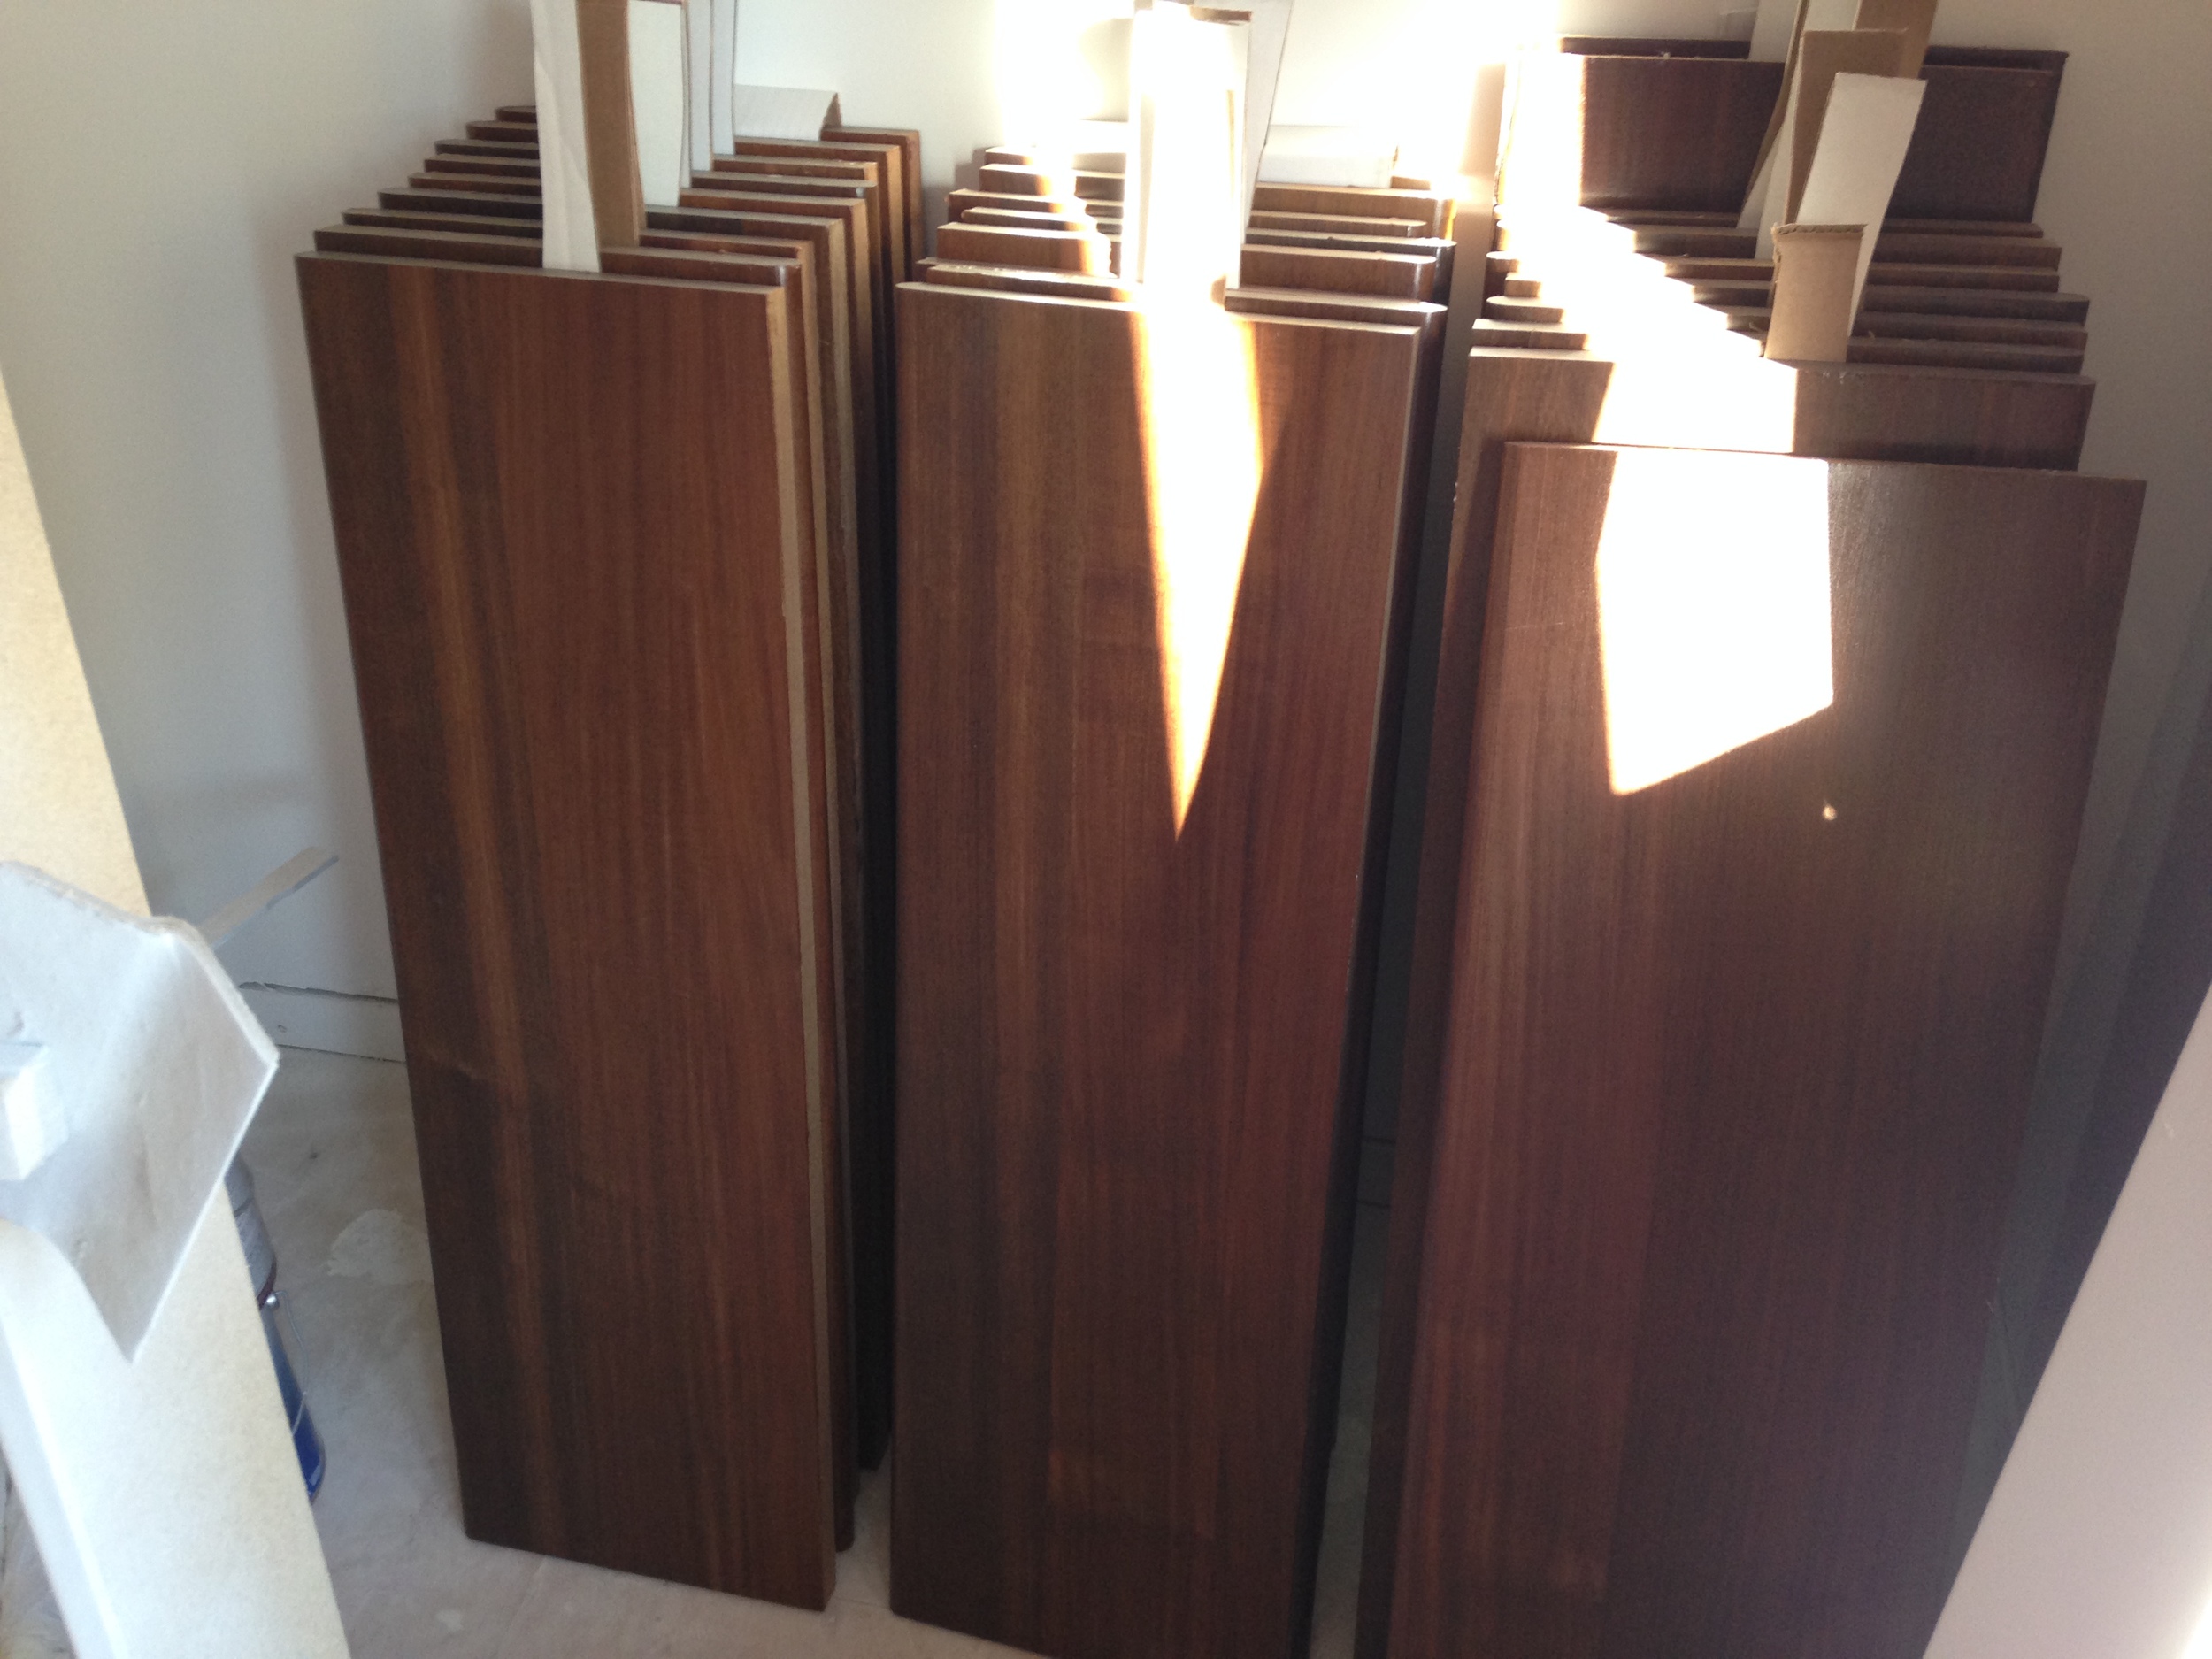  Stained Brazillian Walnut stair treads ready for install 